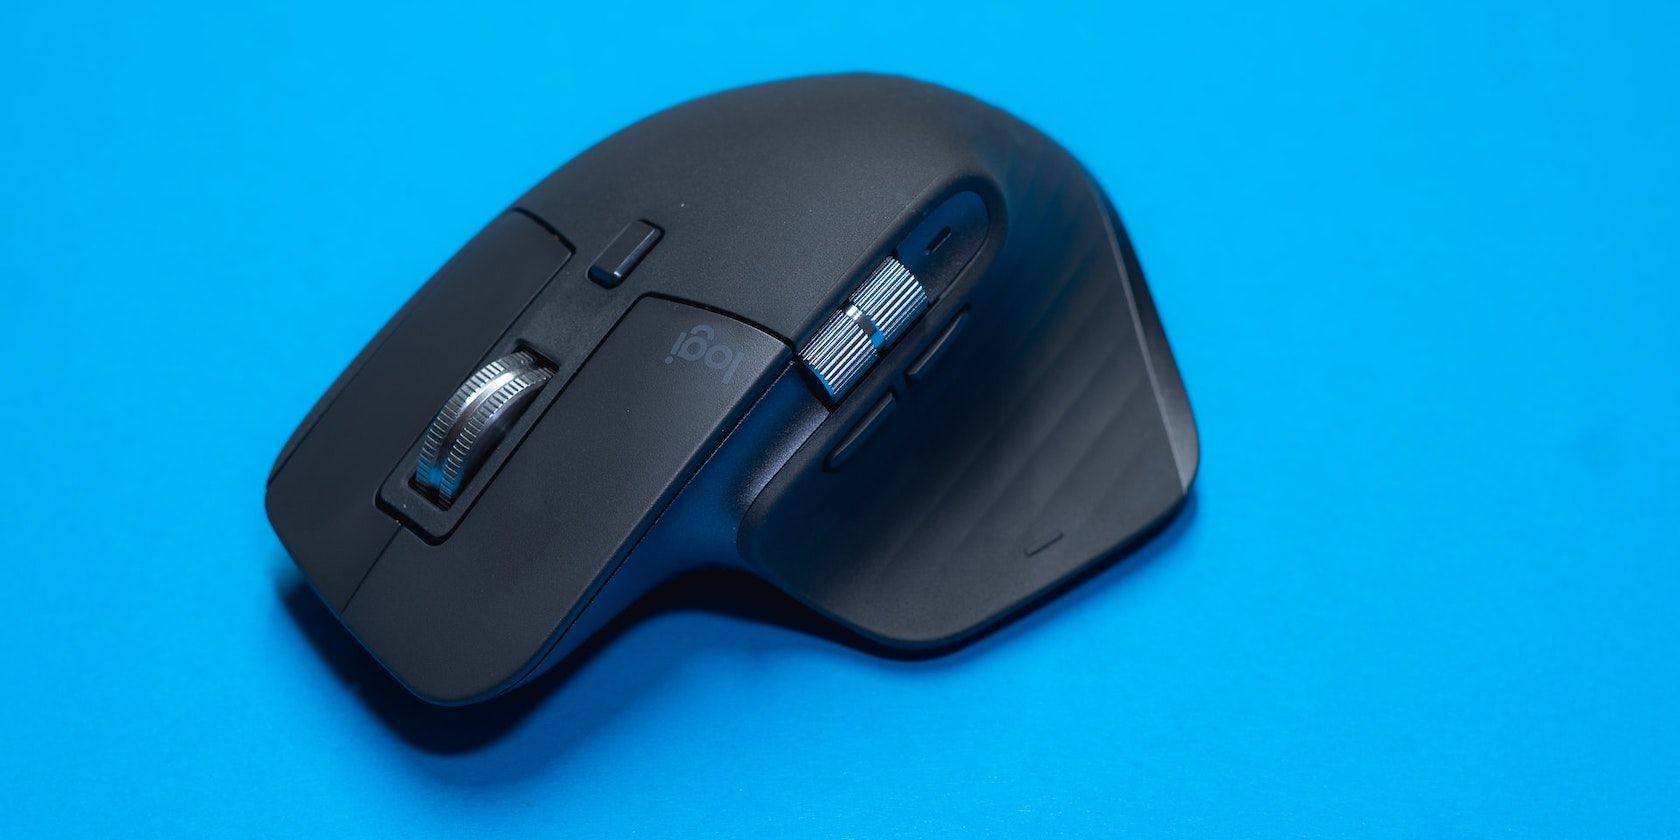 What to Do if Logitech Options Isn't Working on a Mac